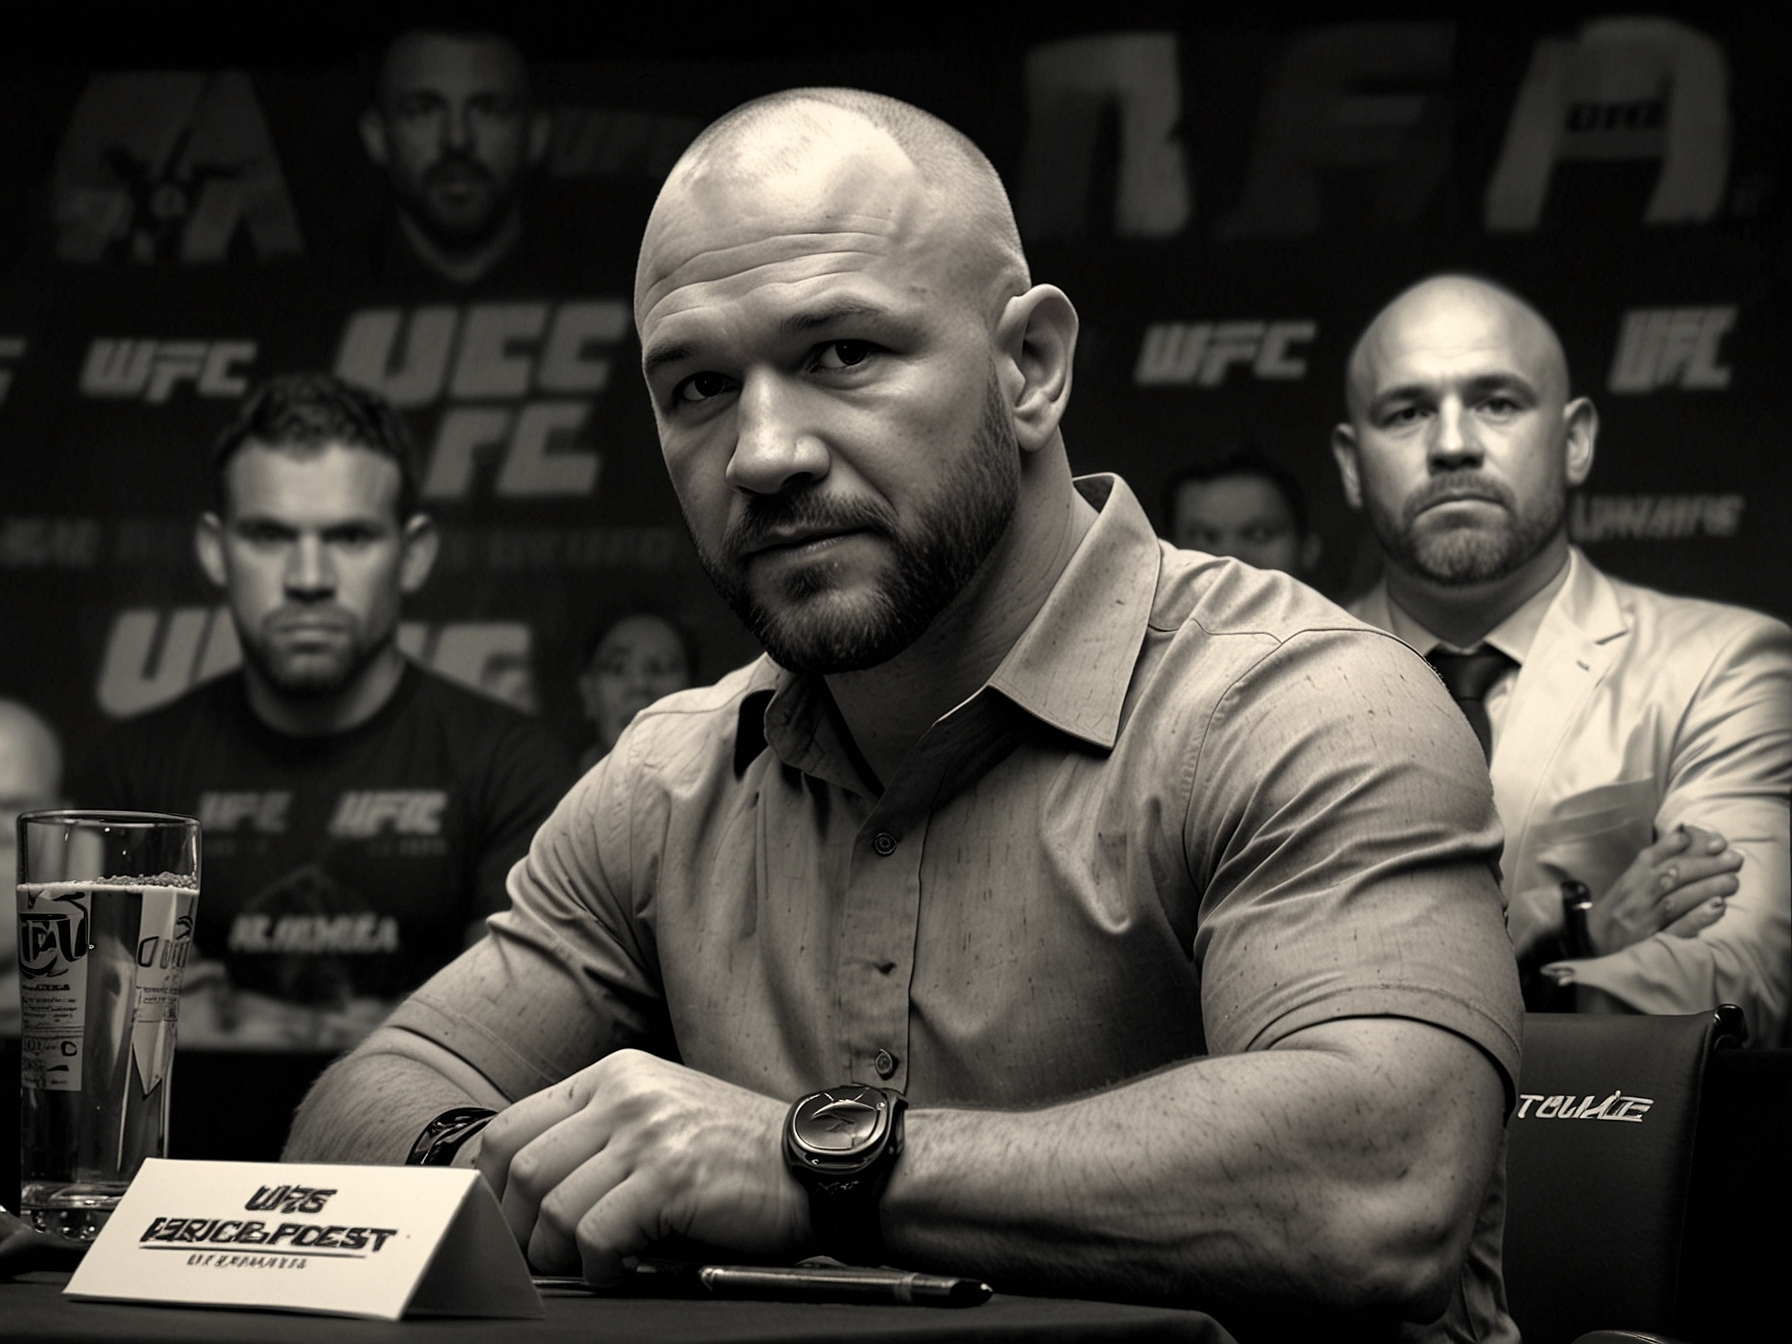 Dana White making a bold announcement at the UFC 303 press conference, expressing his decision to distribute two Fight of the Night bonuses, enhancing excitement for the event.